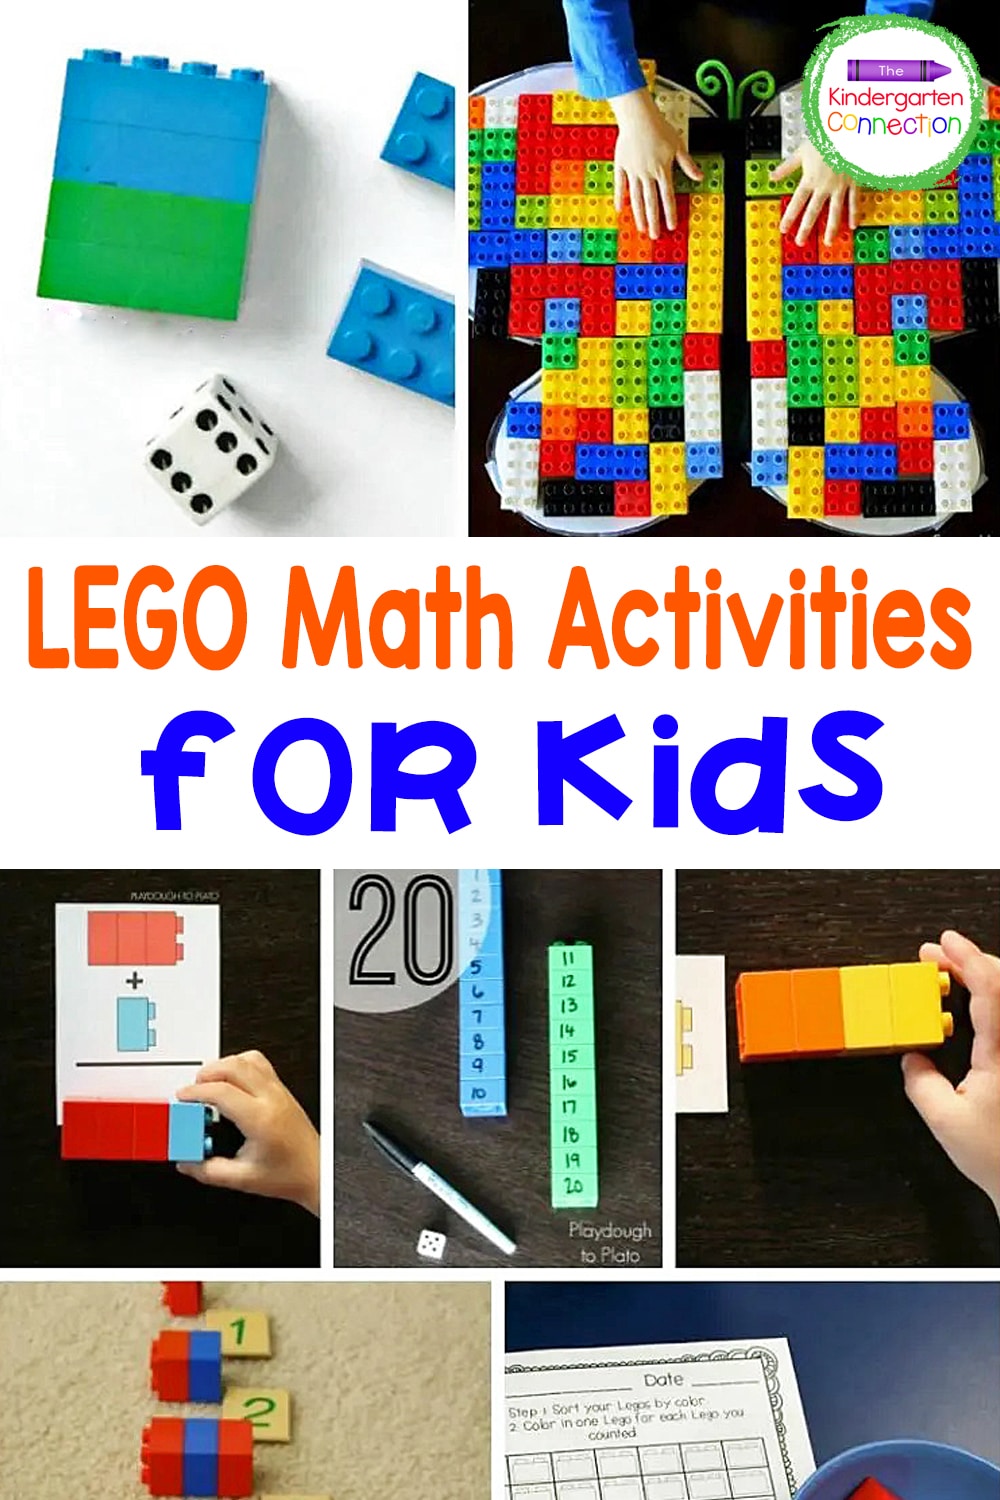 These LEGO math activities are perfect for counting, grouping, patterns, adding, subtracting, and other vital math skills for early learners!